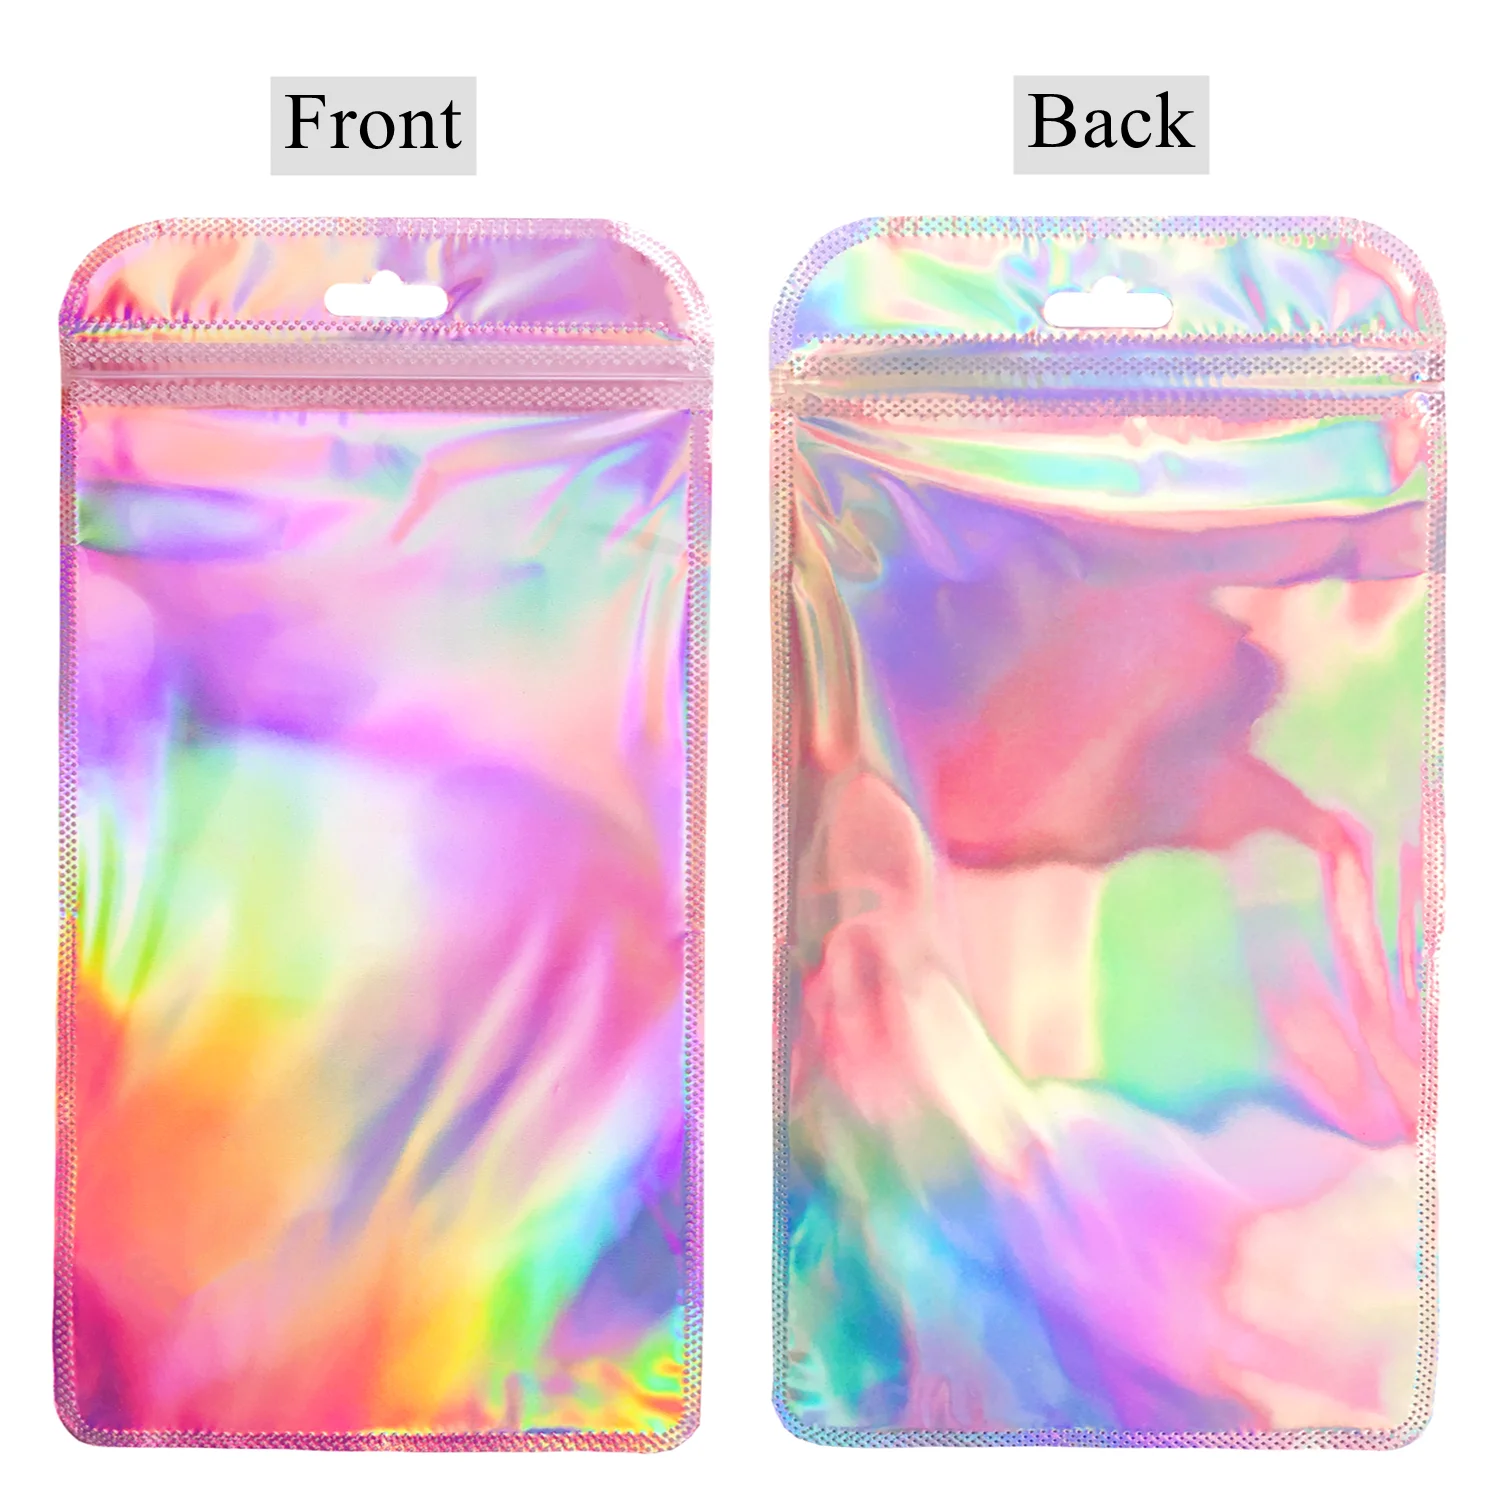 Large Resealable Holographic Pink Bags Mylar Foil Smell Proof Bags With Zipper Sample Cosmetic Sunglasses Plastic Packaging Bag